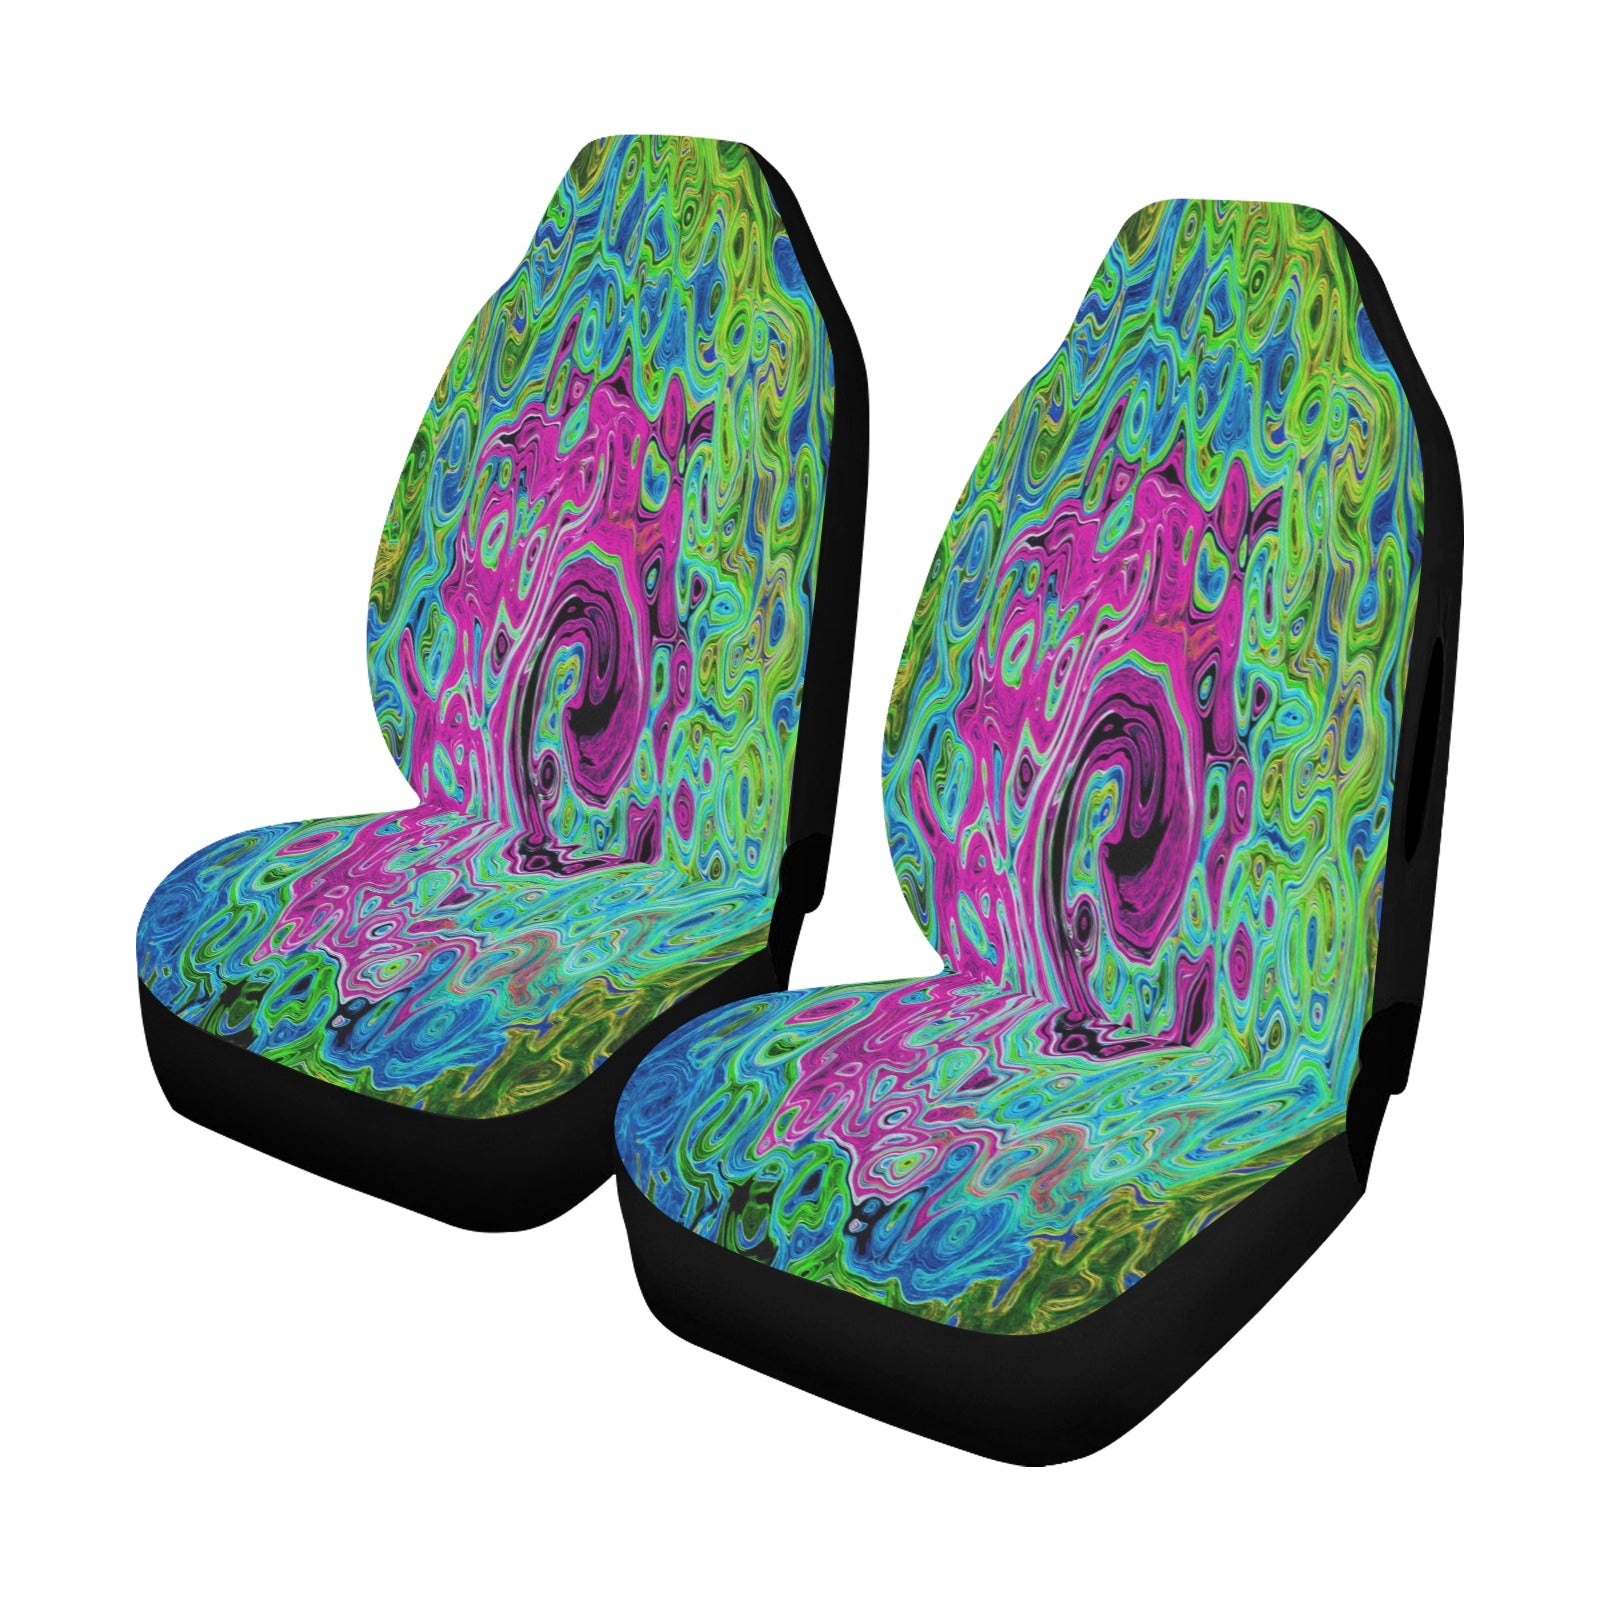 Car Seat Covers, Hot Pink and Blue Groovy Abstract Retro Liquid Swirl